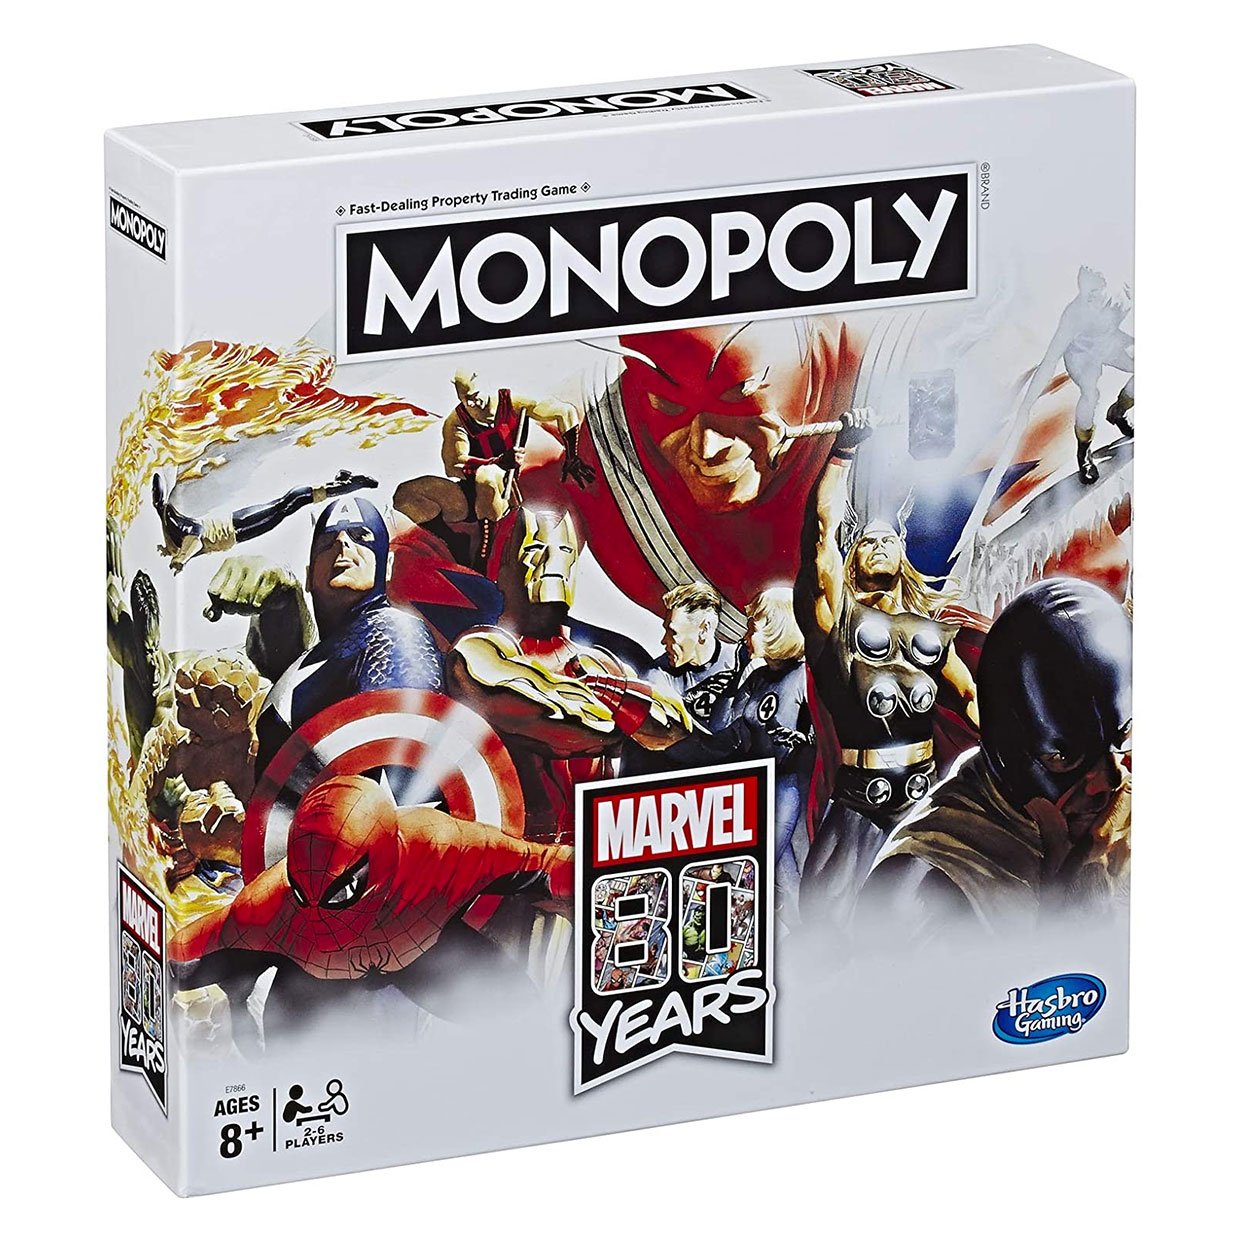 Monopoly: Marvel 80 Years Edition